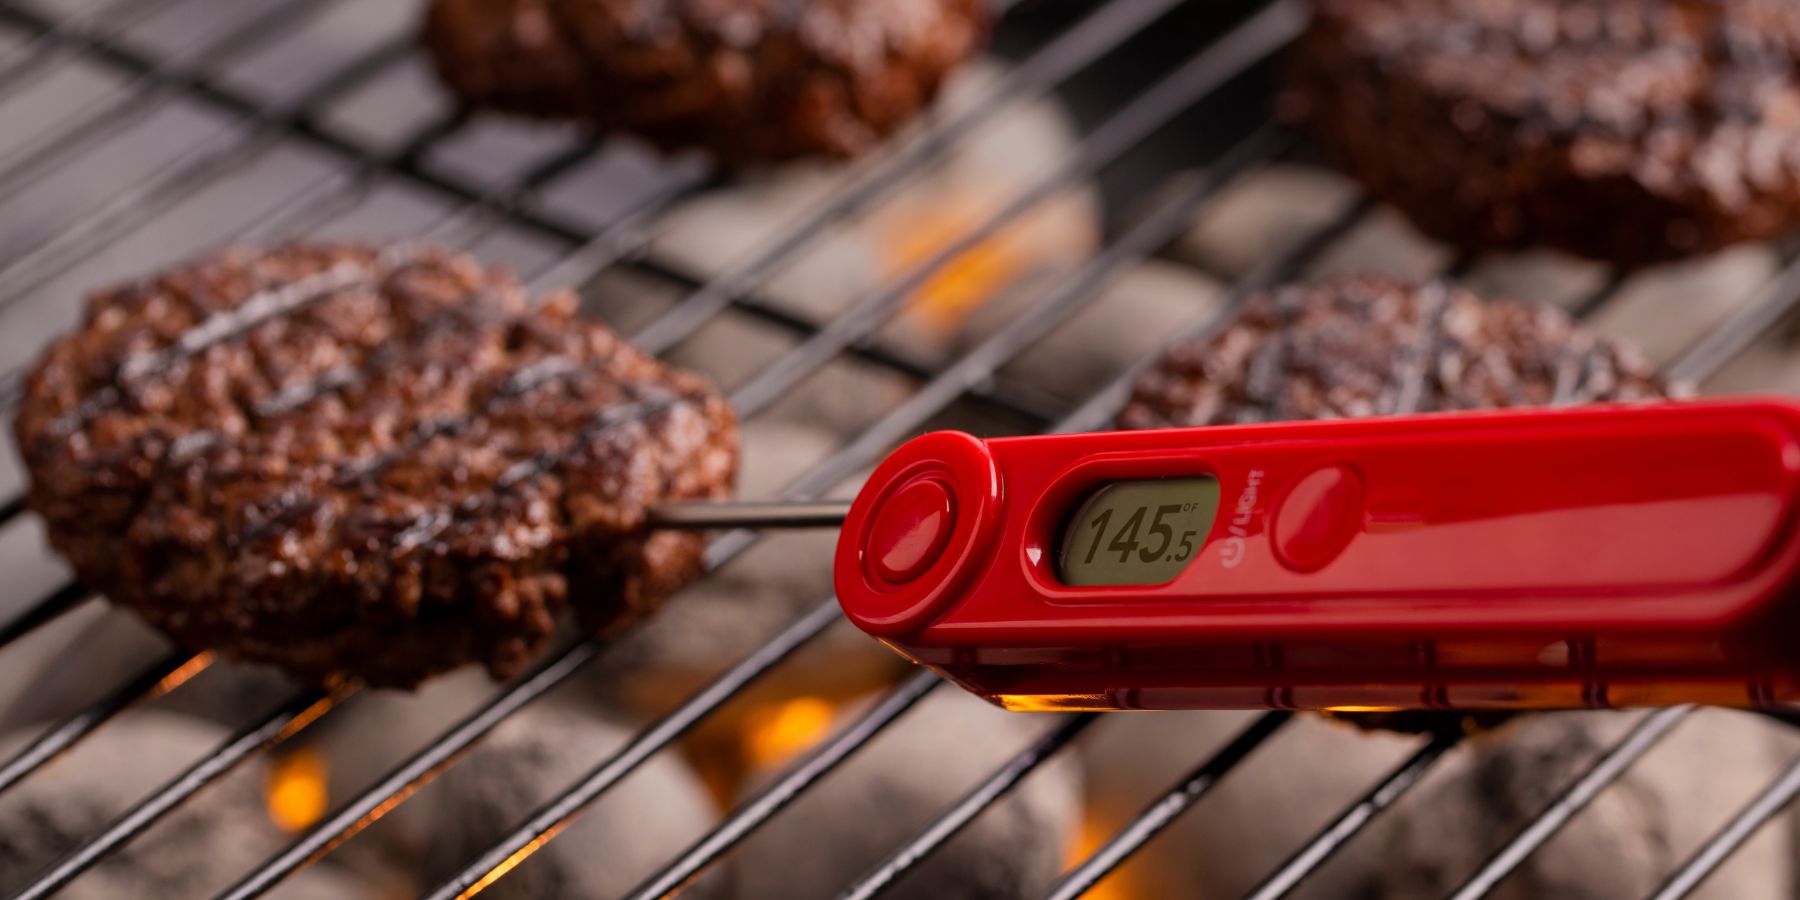 Calibrating Meat Thermometers Correctly